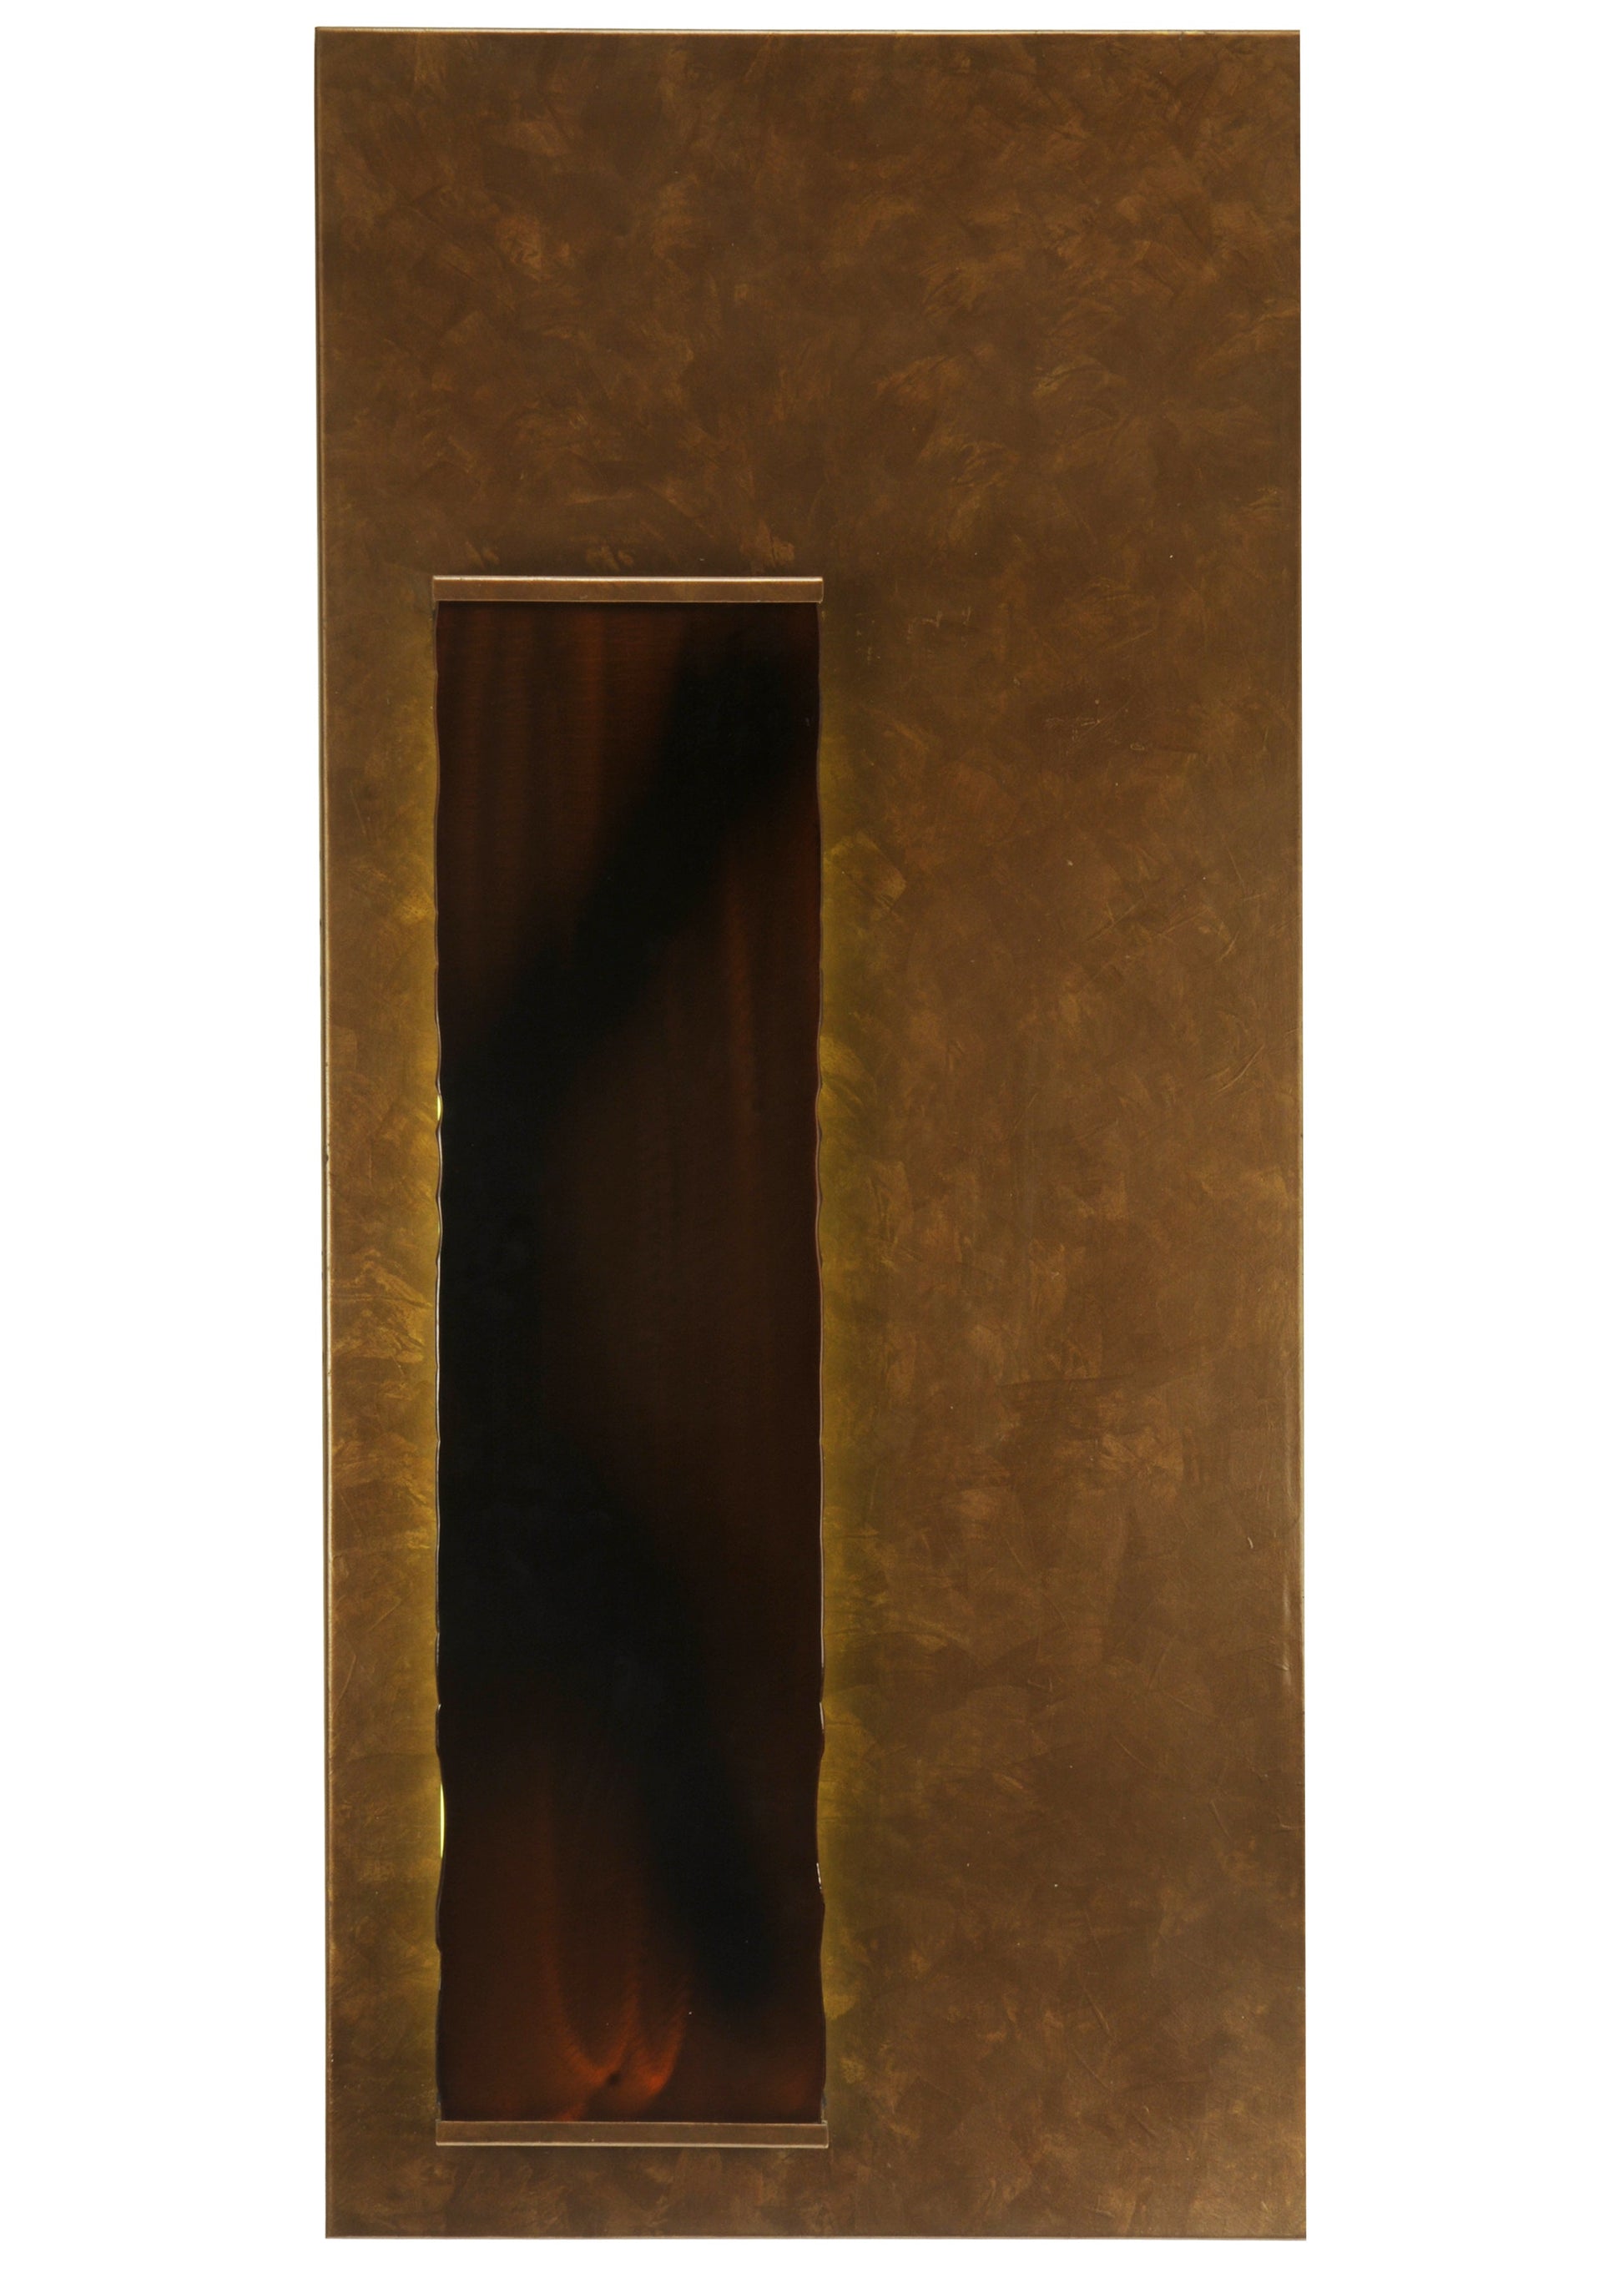 18" Piastra Left LED Wall Sconce by 2nd Ave Lighting